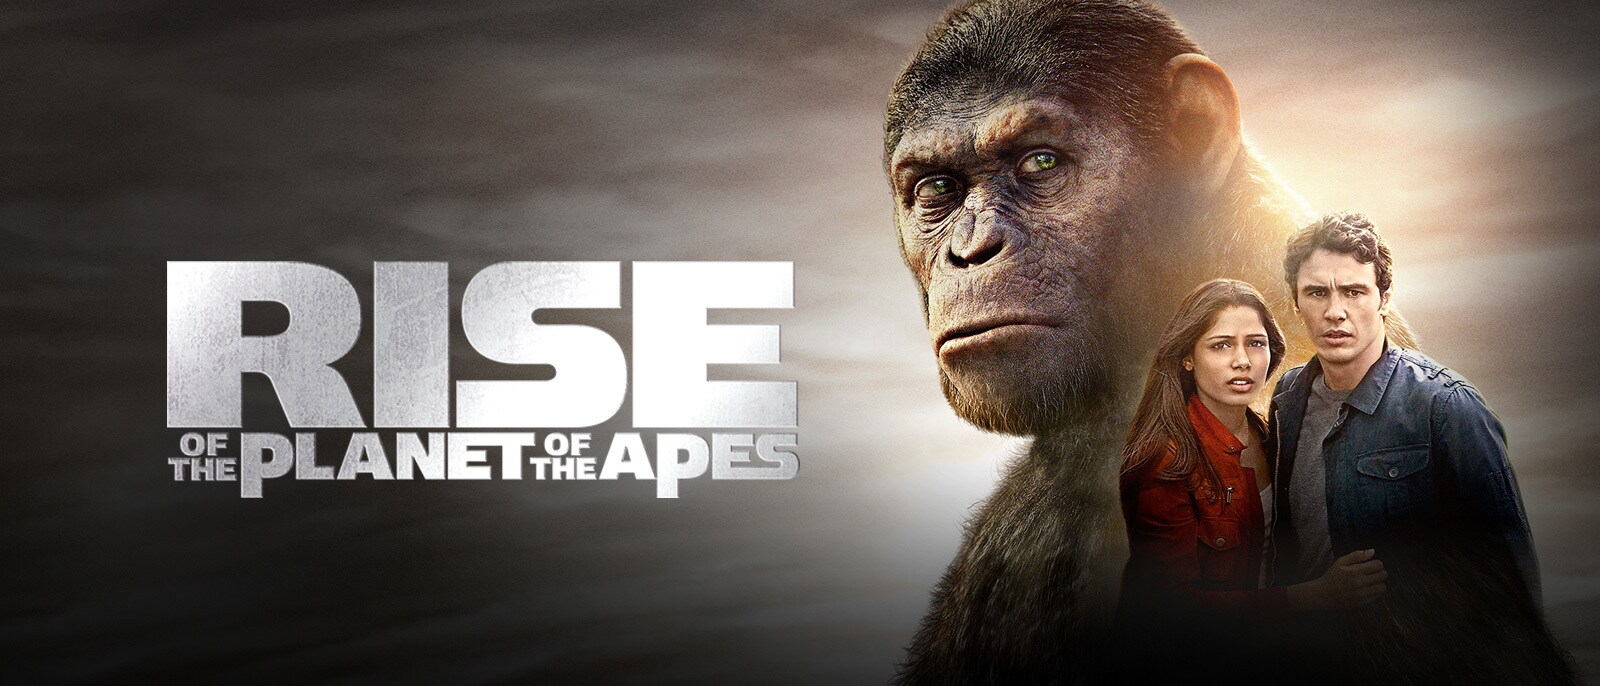 war for the planet of the apes streaming 123 movies